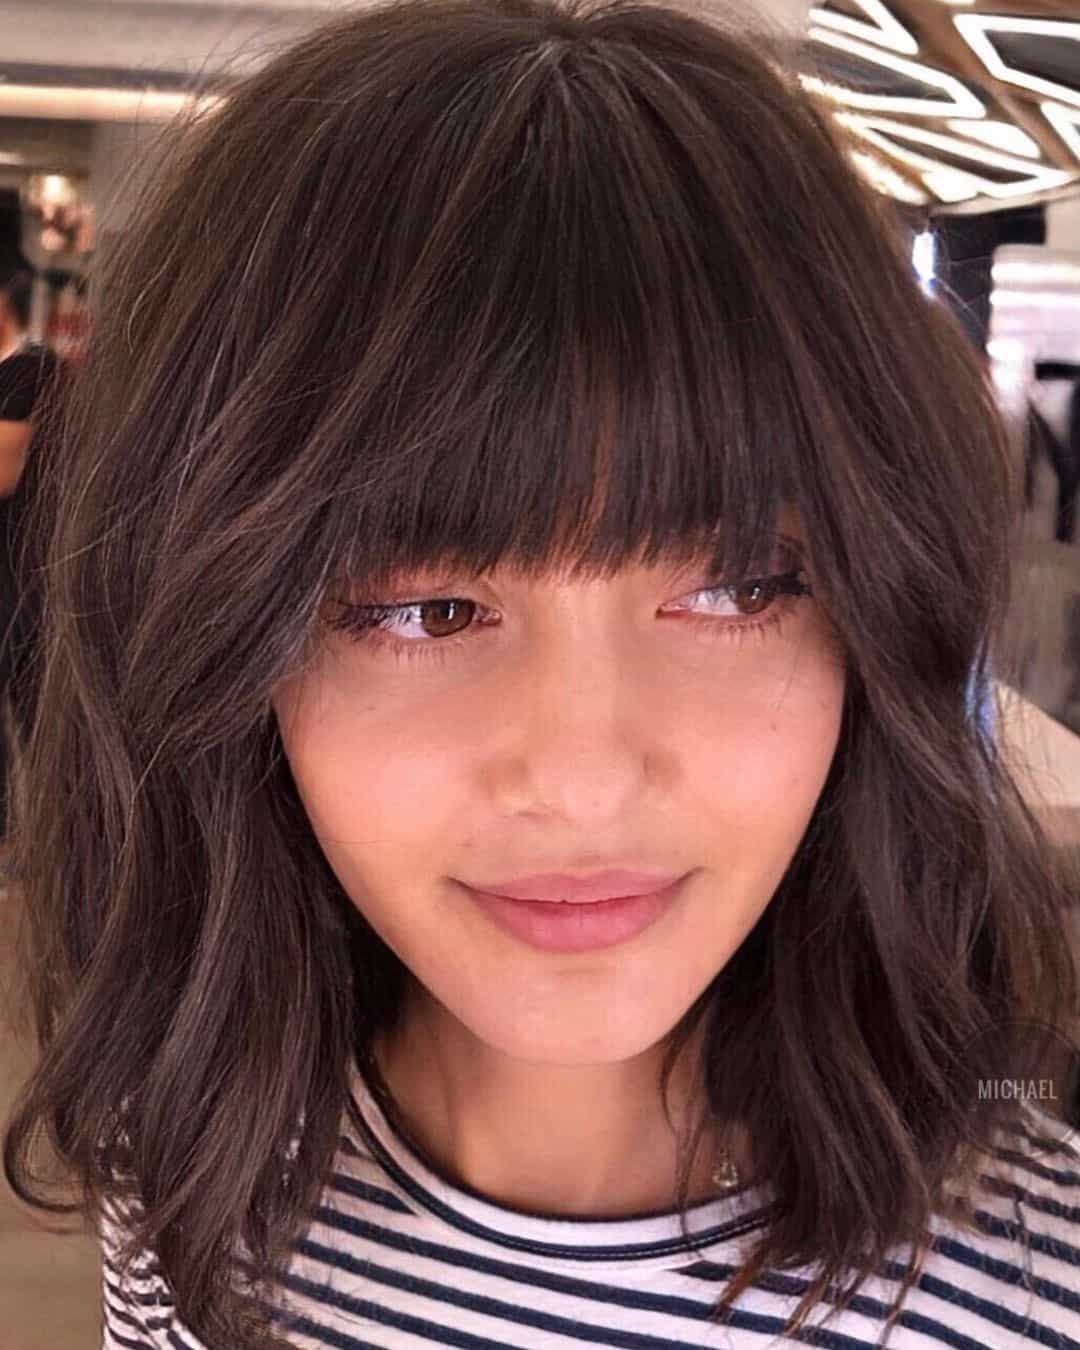 Brown Look With Bangs For Small Foreheads 